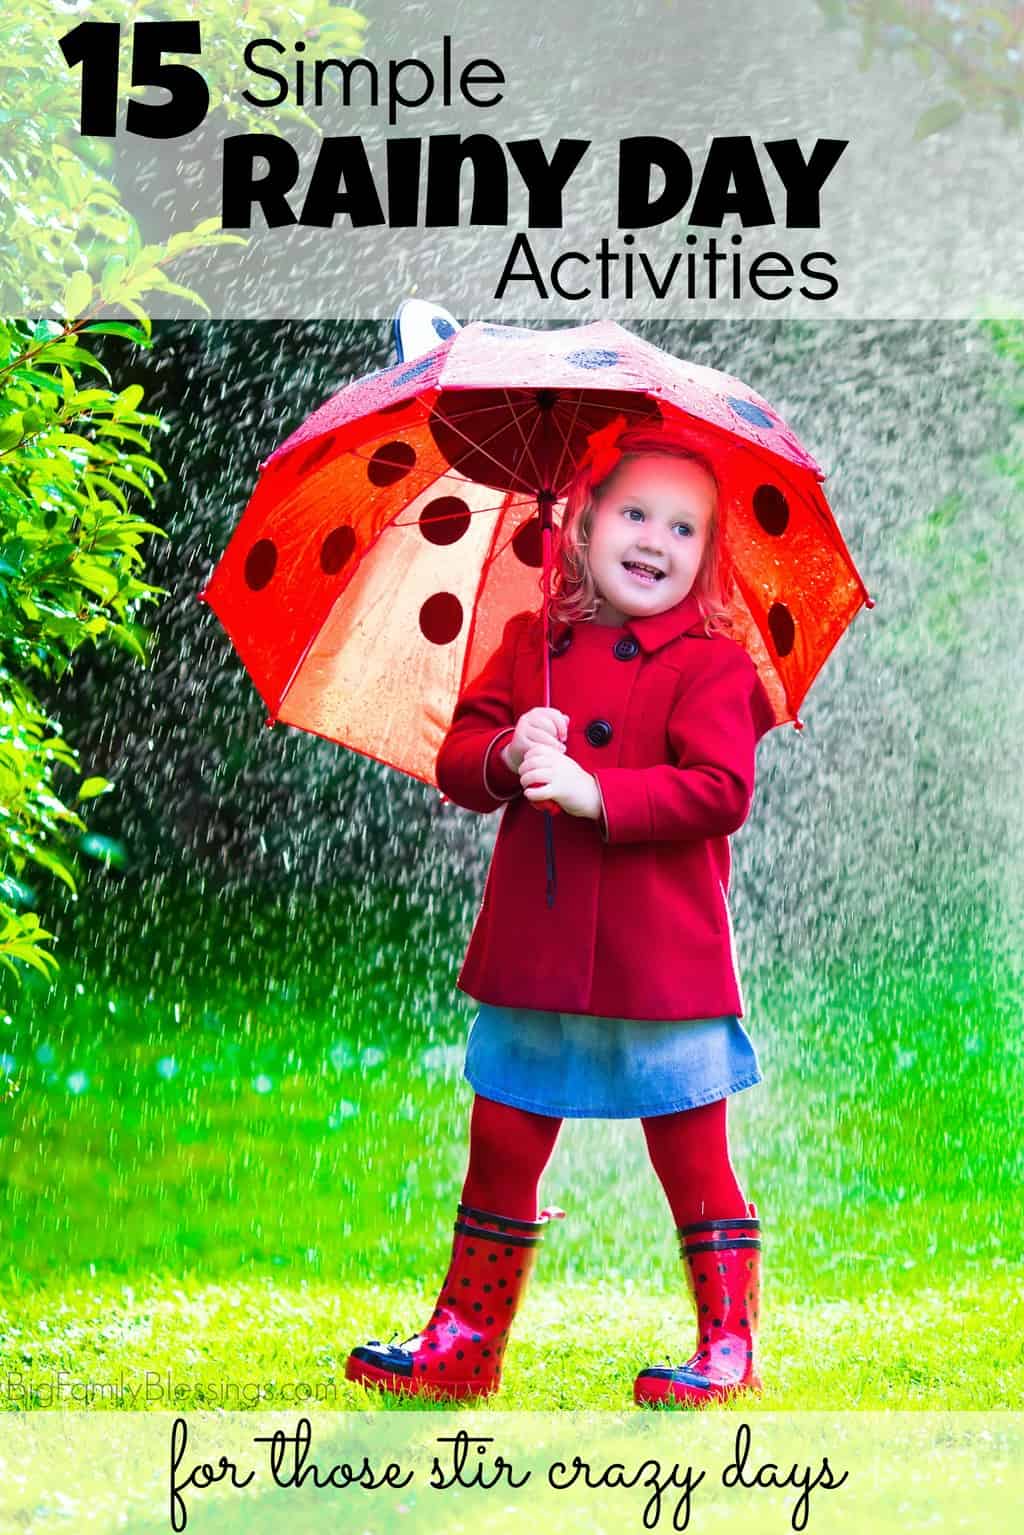 15 Simple Rainy Day Activities. (Mostly) no mess ideas for rainy days. Cooped up kids driving you crazy? Here are 15 ideas that don't take much effort from Mom that will keep the kids happily occupied all afternoon!